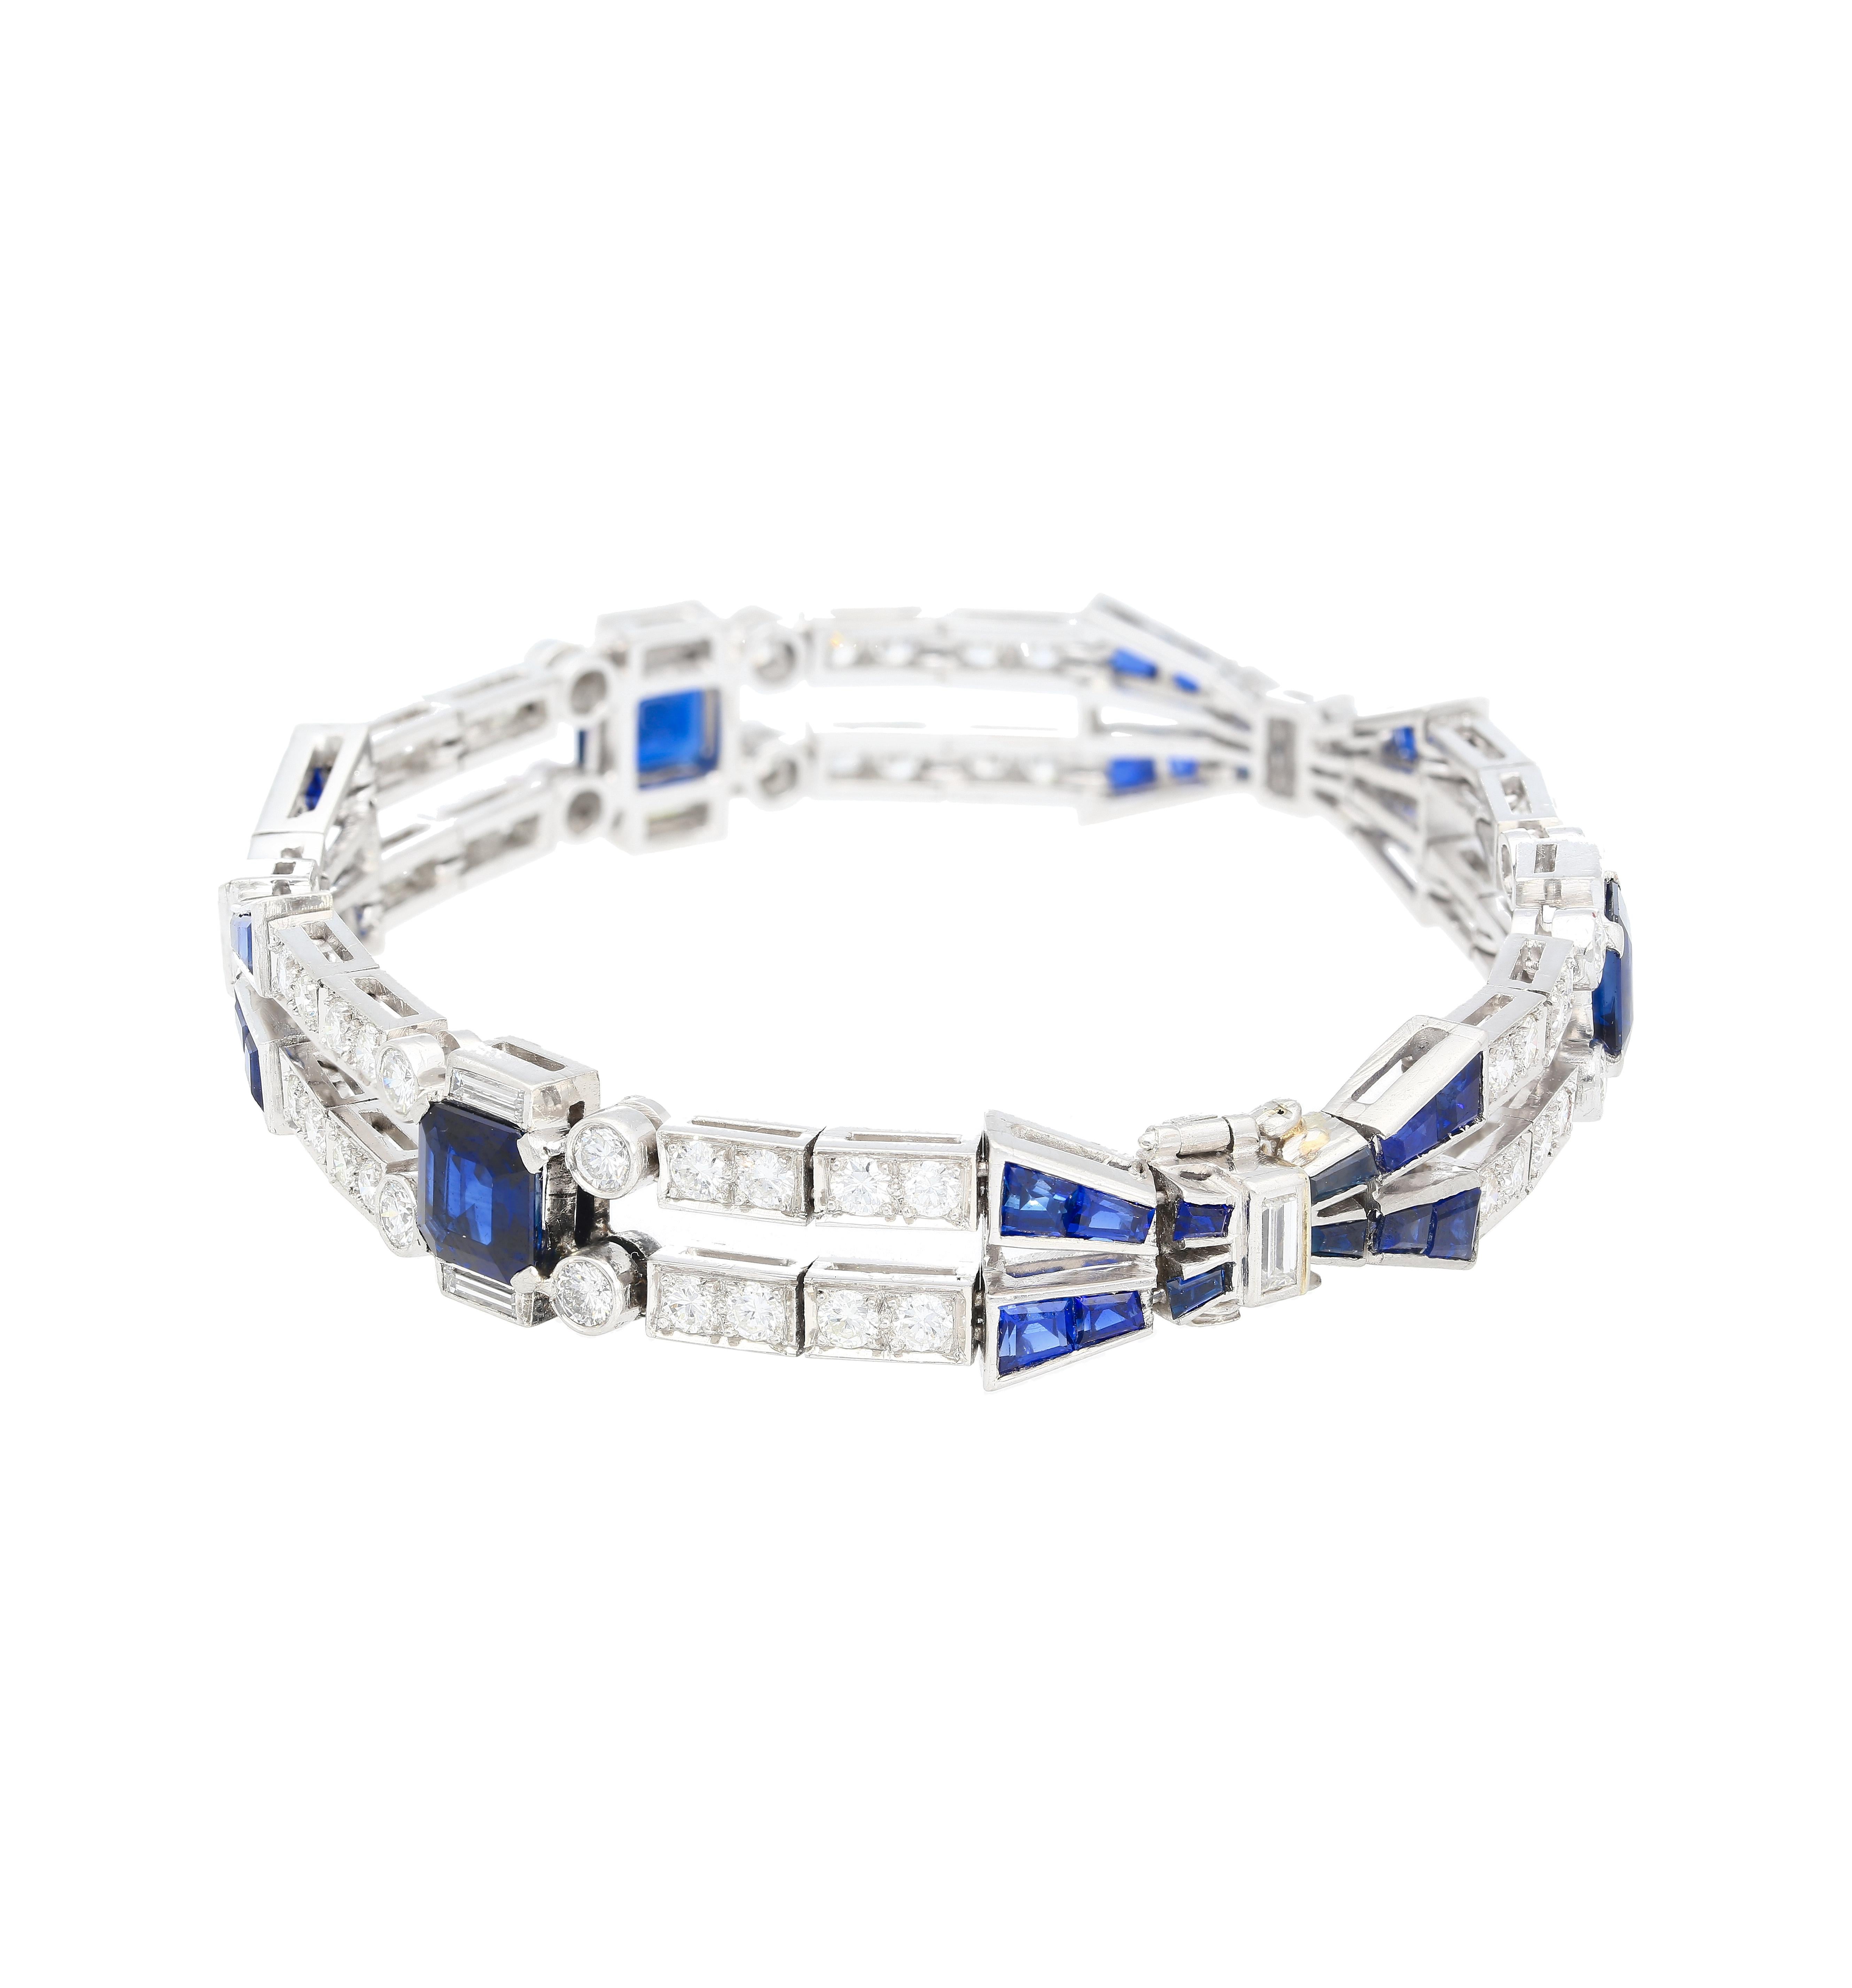 Indulge in the timeless allure of Art Deco with our stunning Blue Sapphire and Diamond Bracelet set in platinum. This exquisite piece embodies the essence of Art Deco design, boasting a perfect blend of quintessential Art Deco symmetry and vibrant